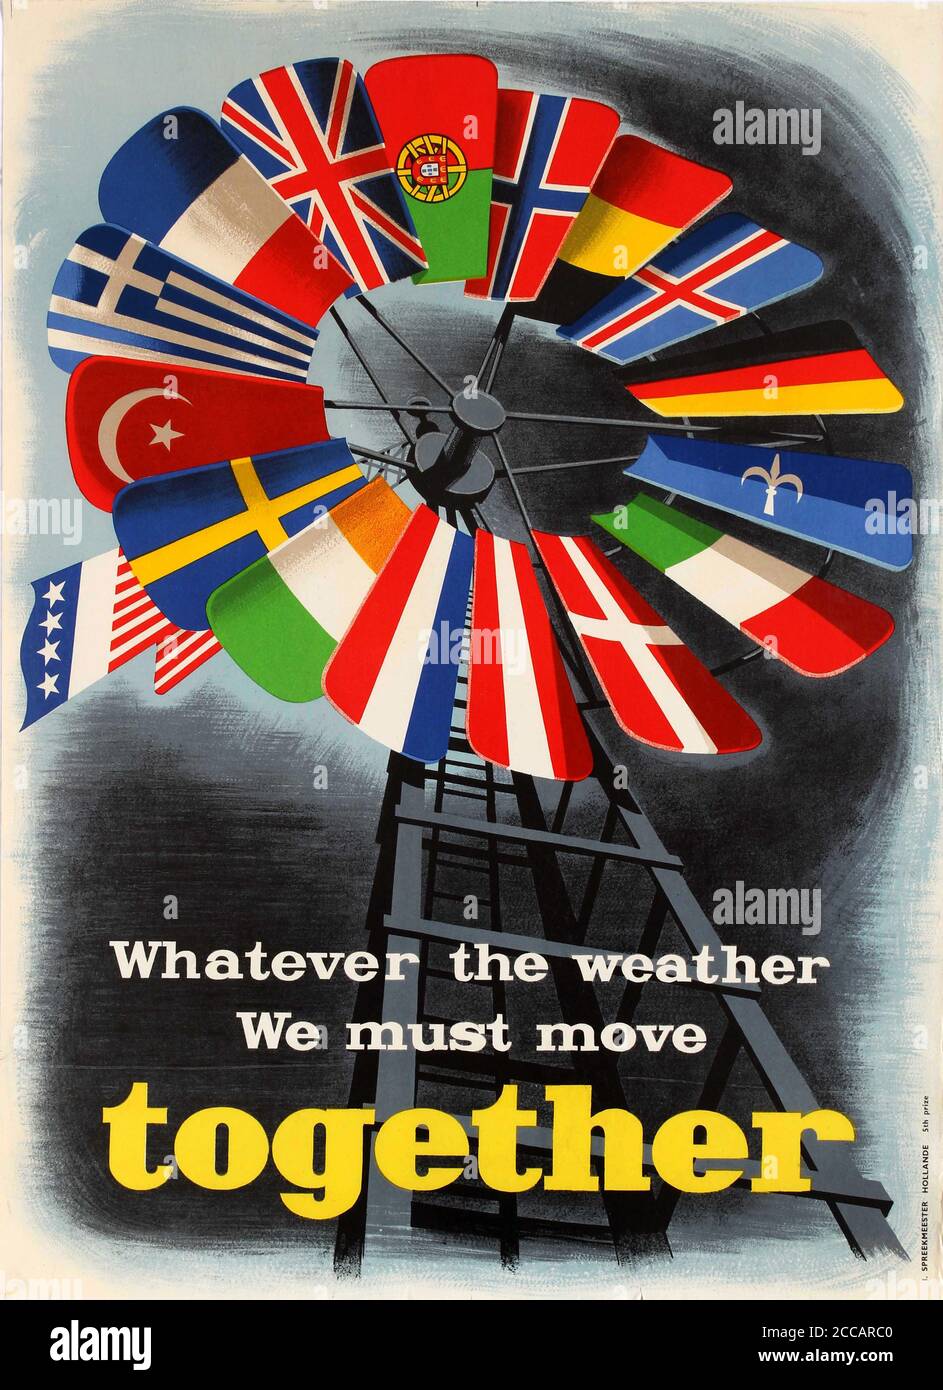 ERP. The Marshall Plan. Museum: PRIVATE COLLECTION. Author: Ies Spreekmeester. Stock Photo